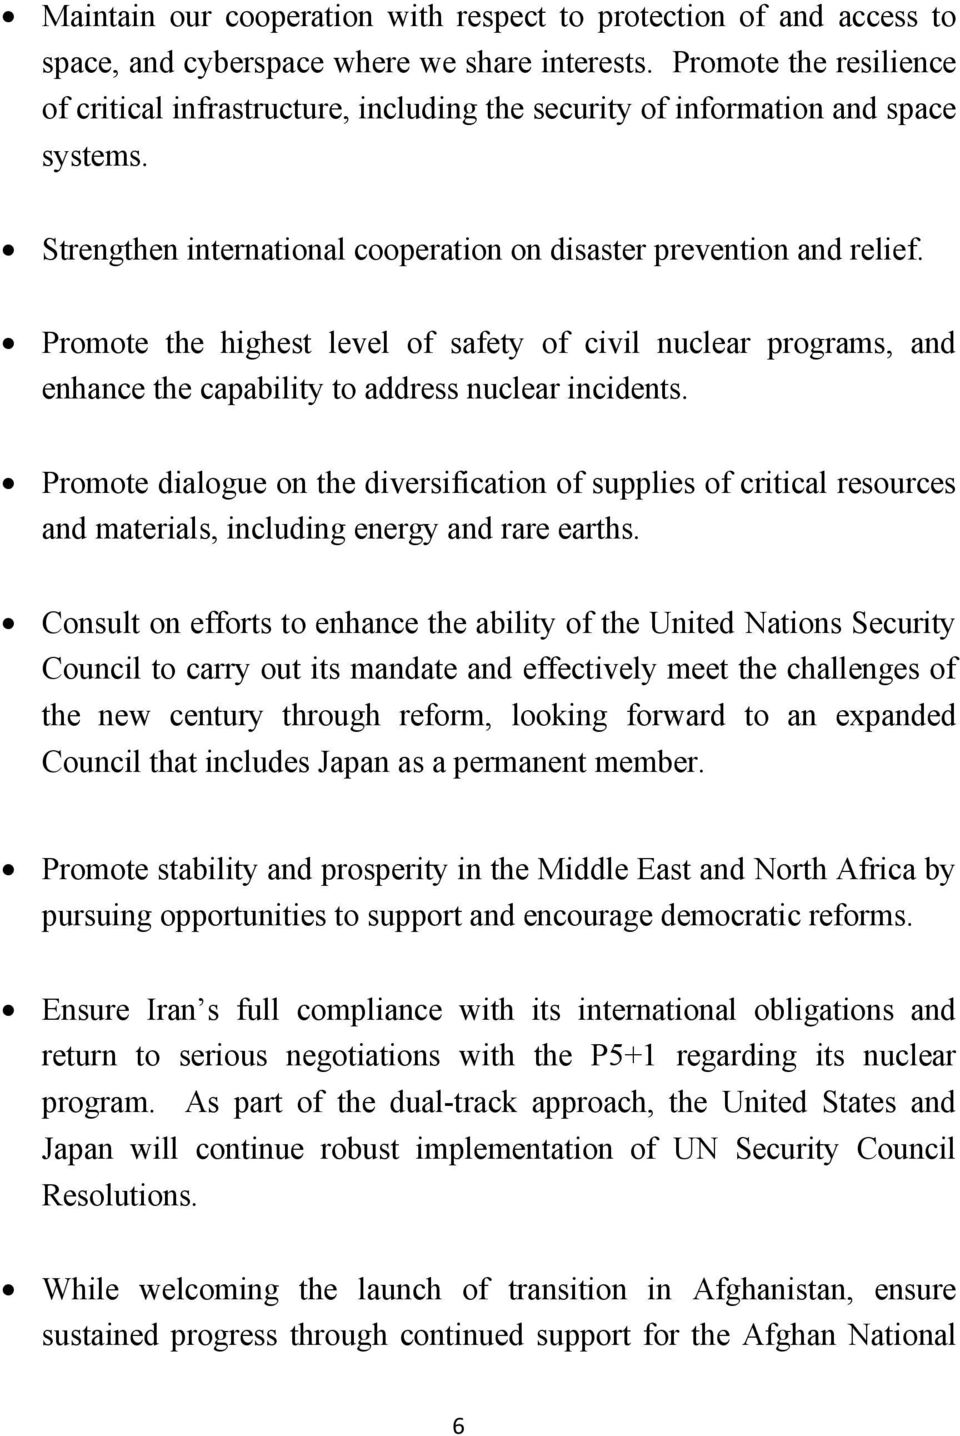 Promote the highest level of safety of civil nuclear programs, and enhance the capability to address nuclear incidents.